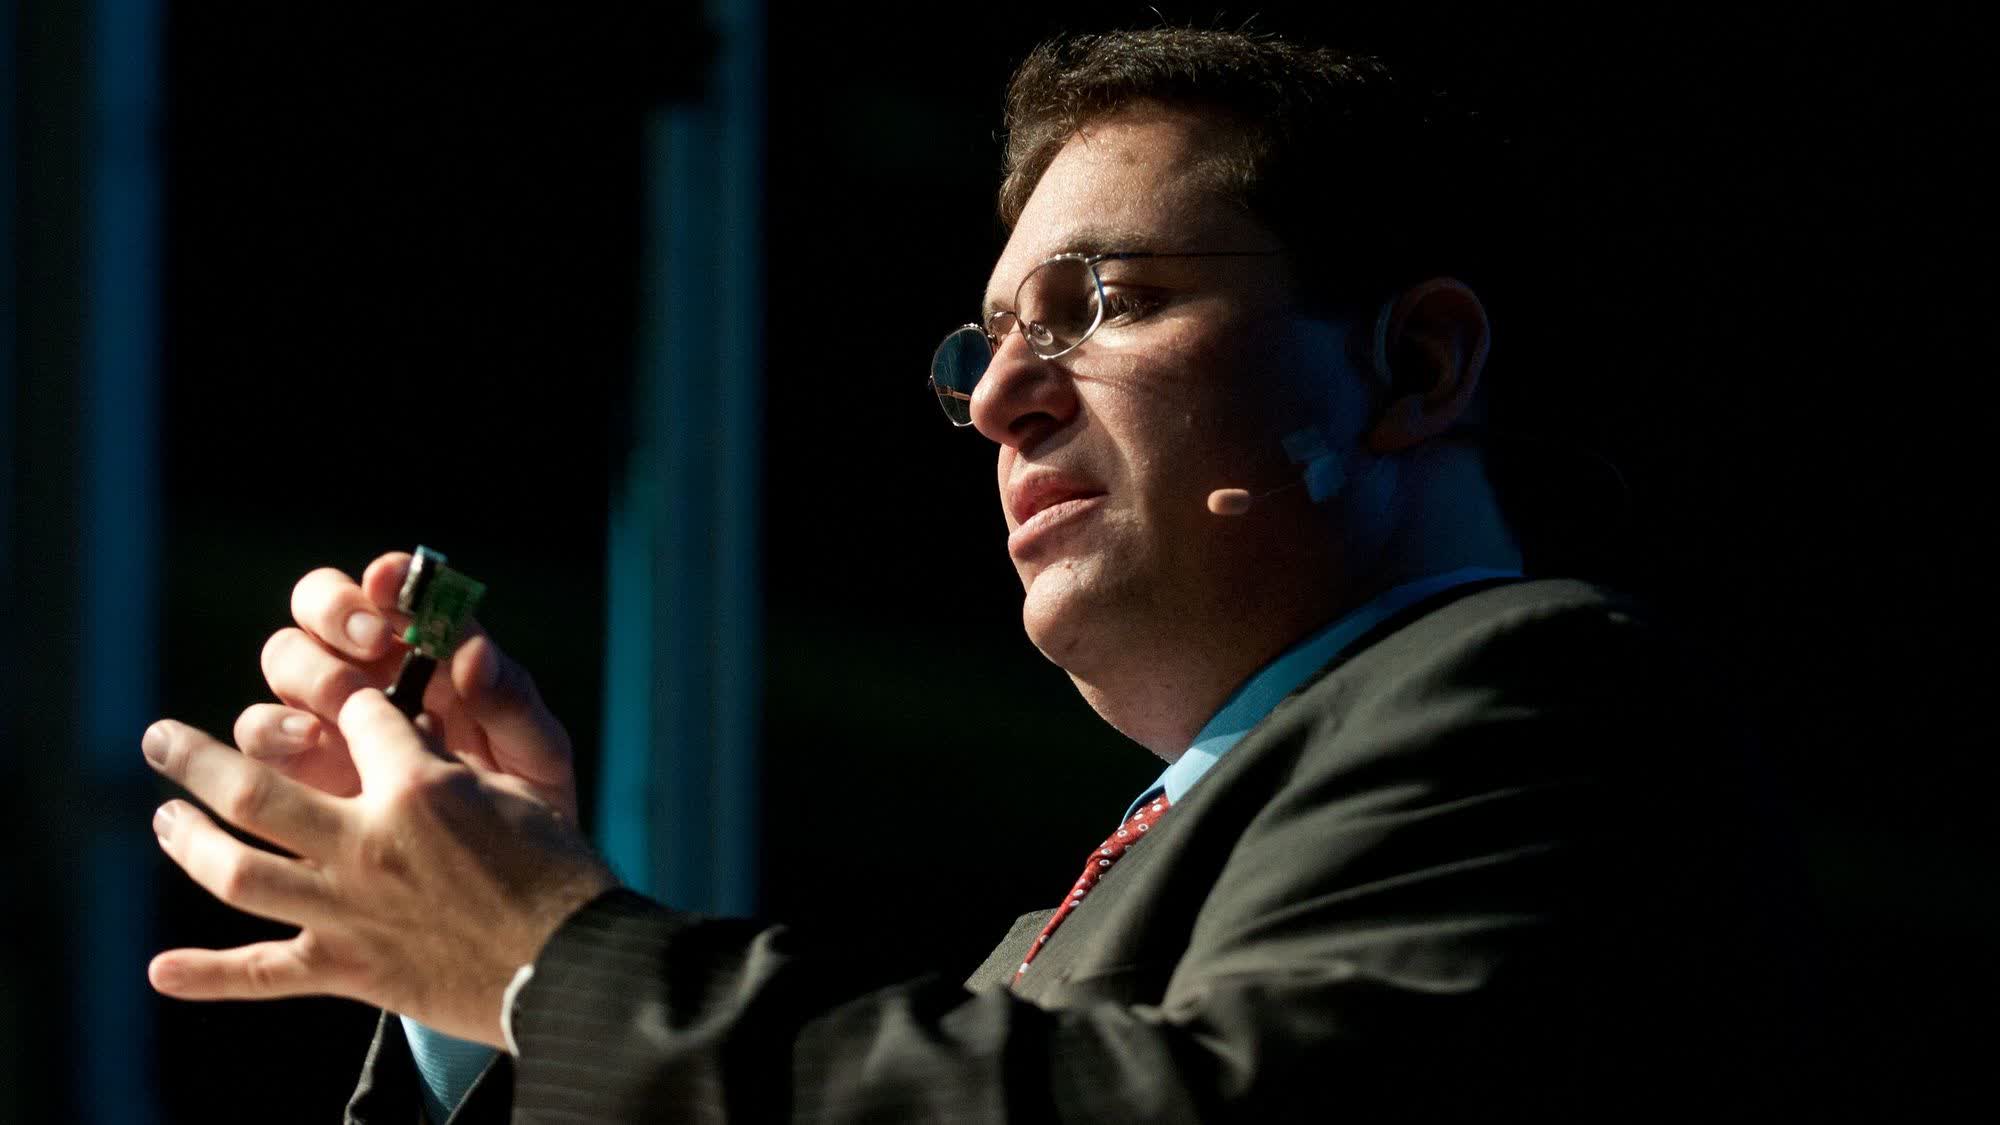 Kevin Mitnick, the controversial hacker-turned-cybersecurity professional has died at age 59